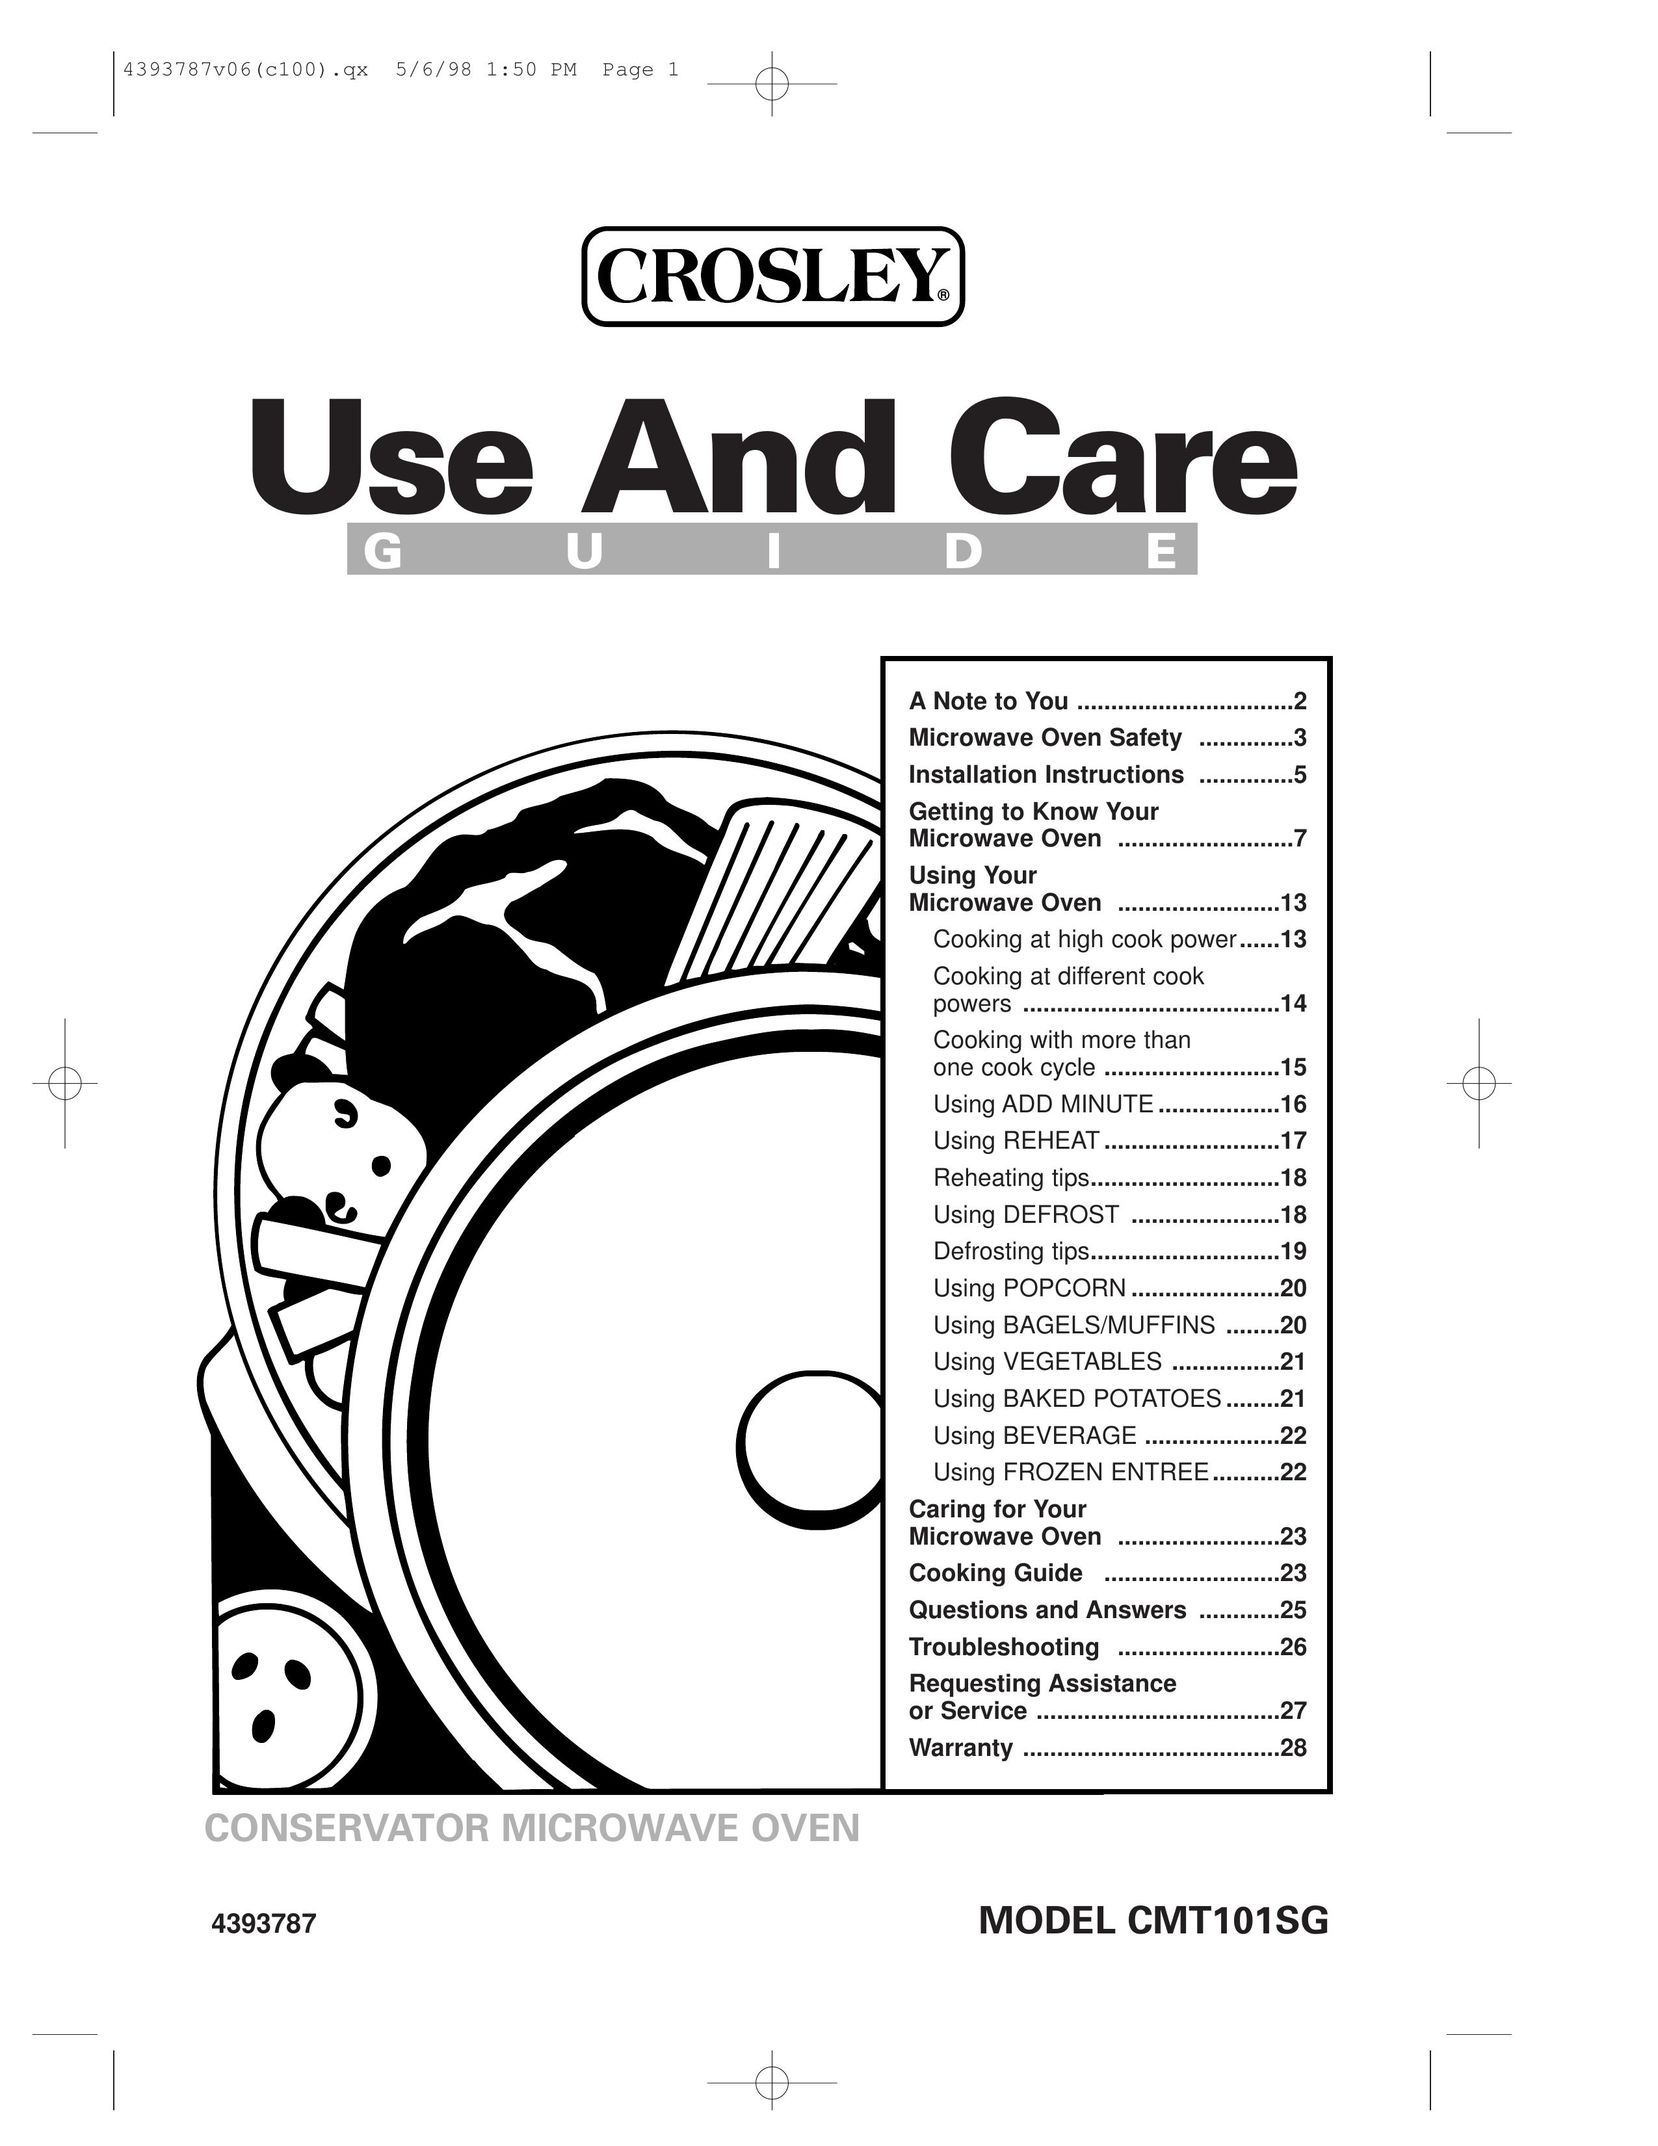 Crosley CMT101SG Microwave Oven User Manual